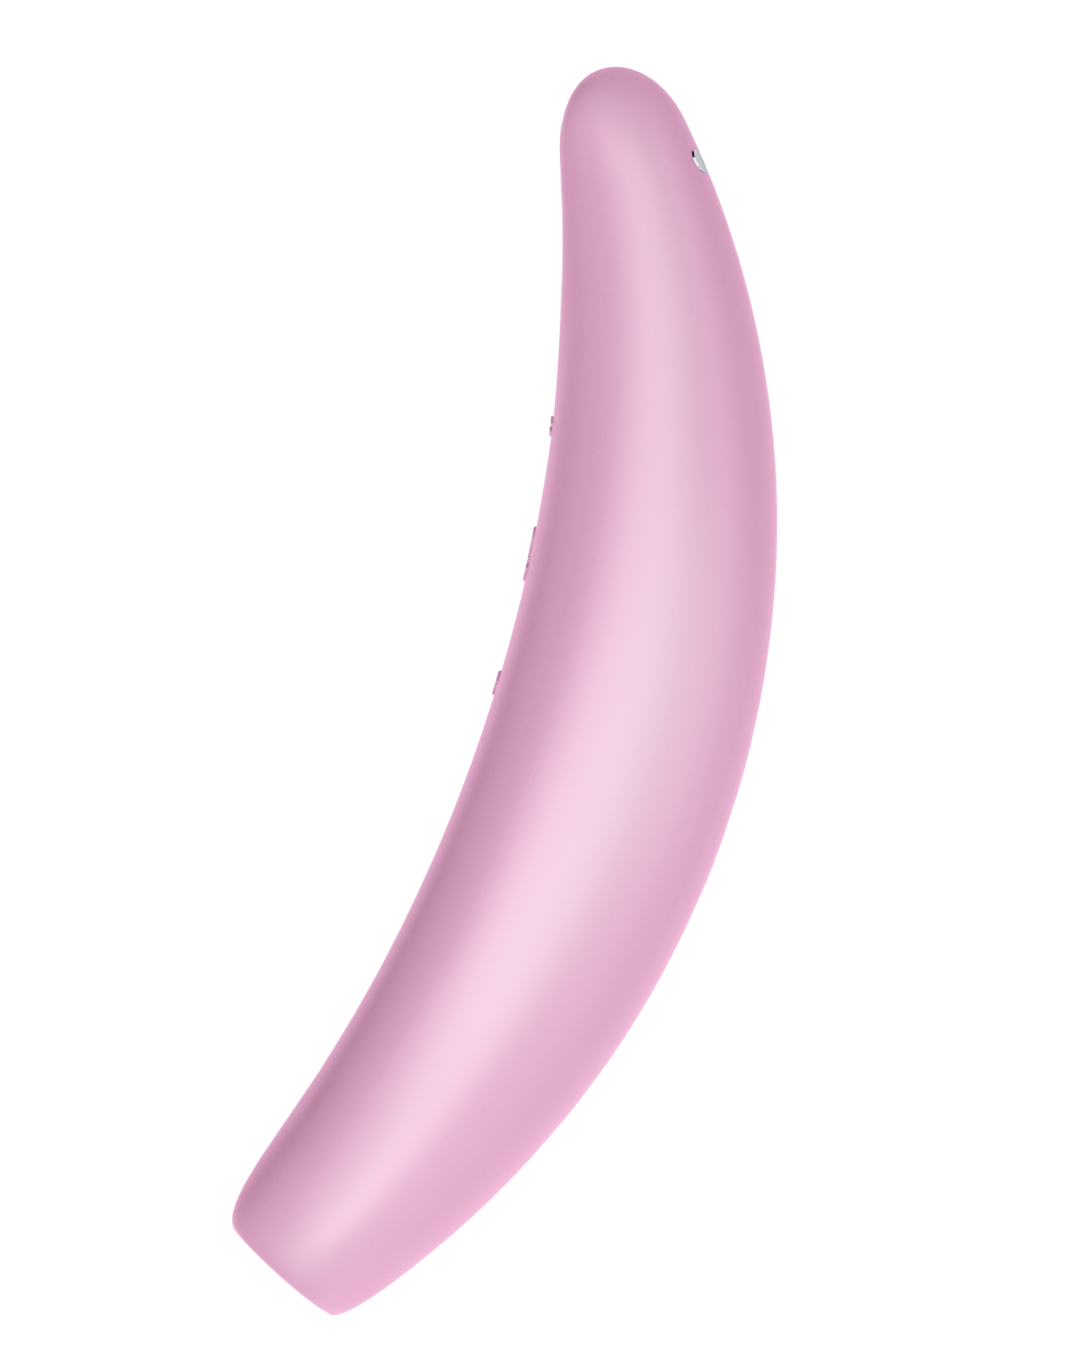 Satisfyer Curvy 3+ Pressure Wave + Vibration Stimulator - Pale Pink side view showing the curve of the body